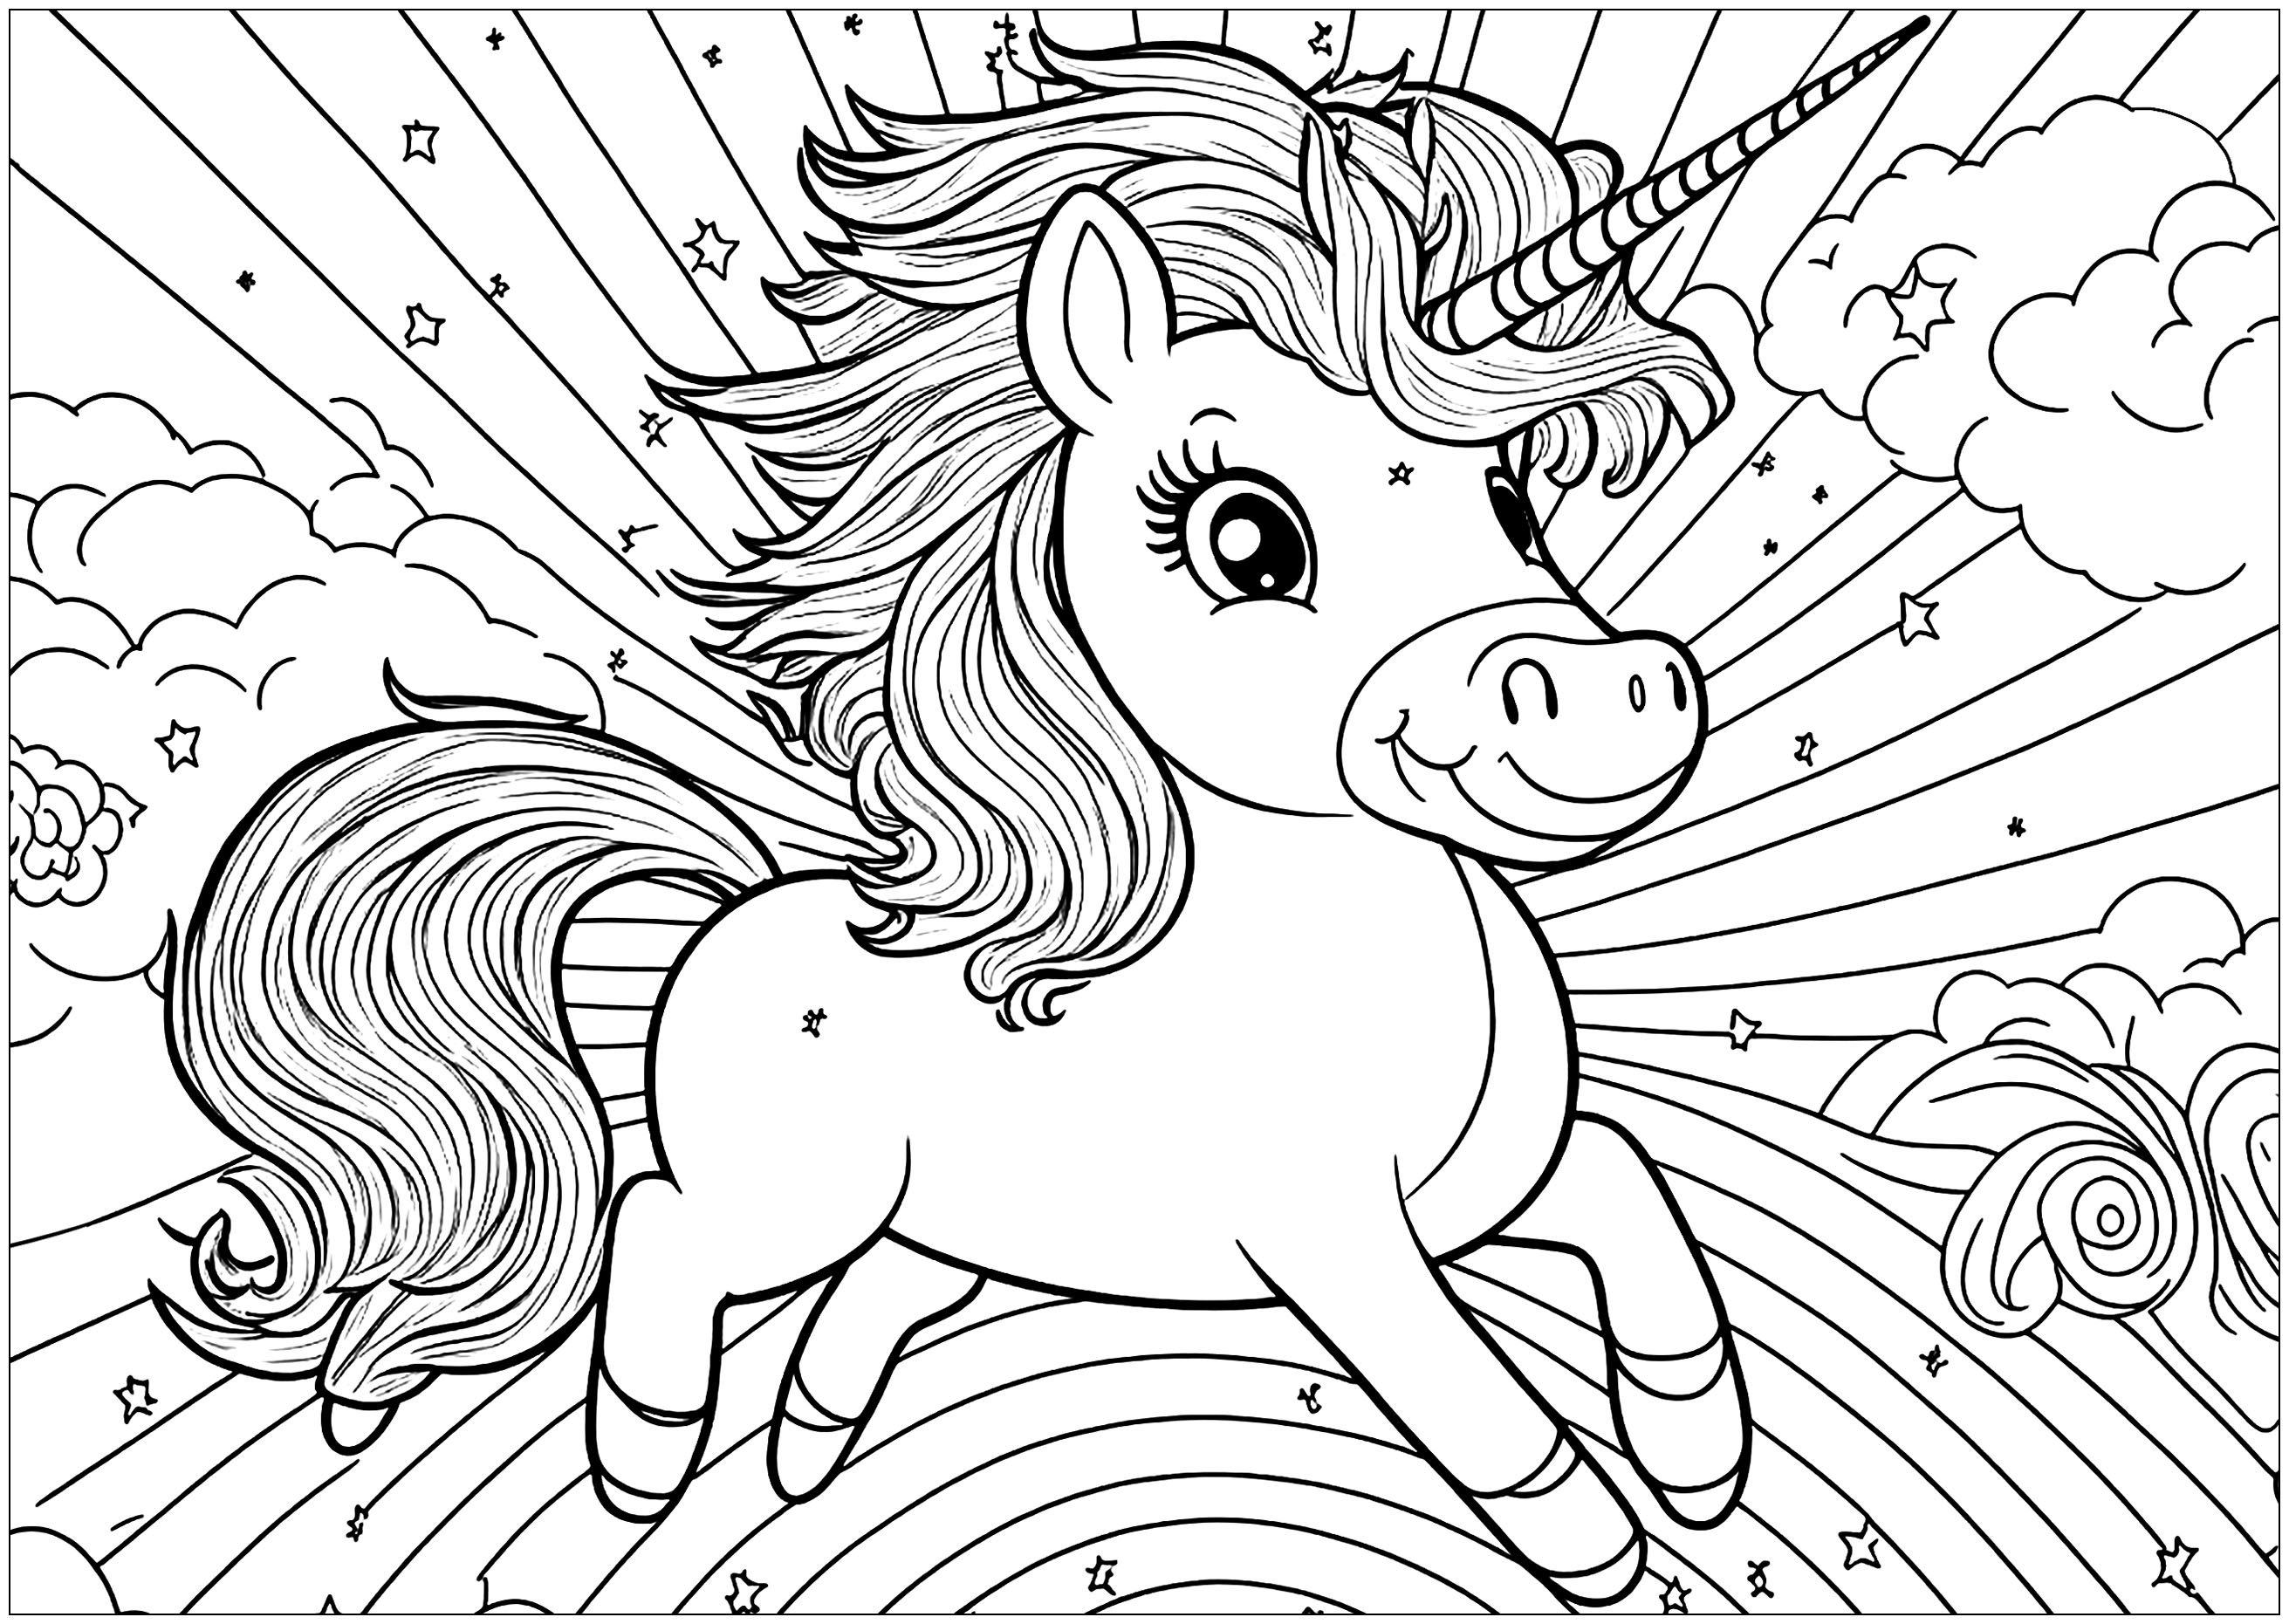 Beautiful unicorn to color, with a rainbow in the background